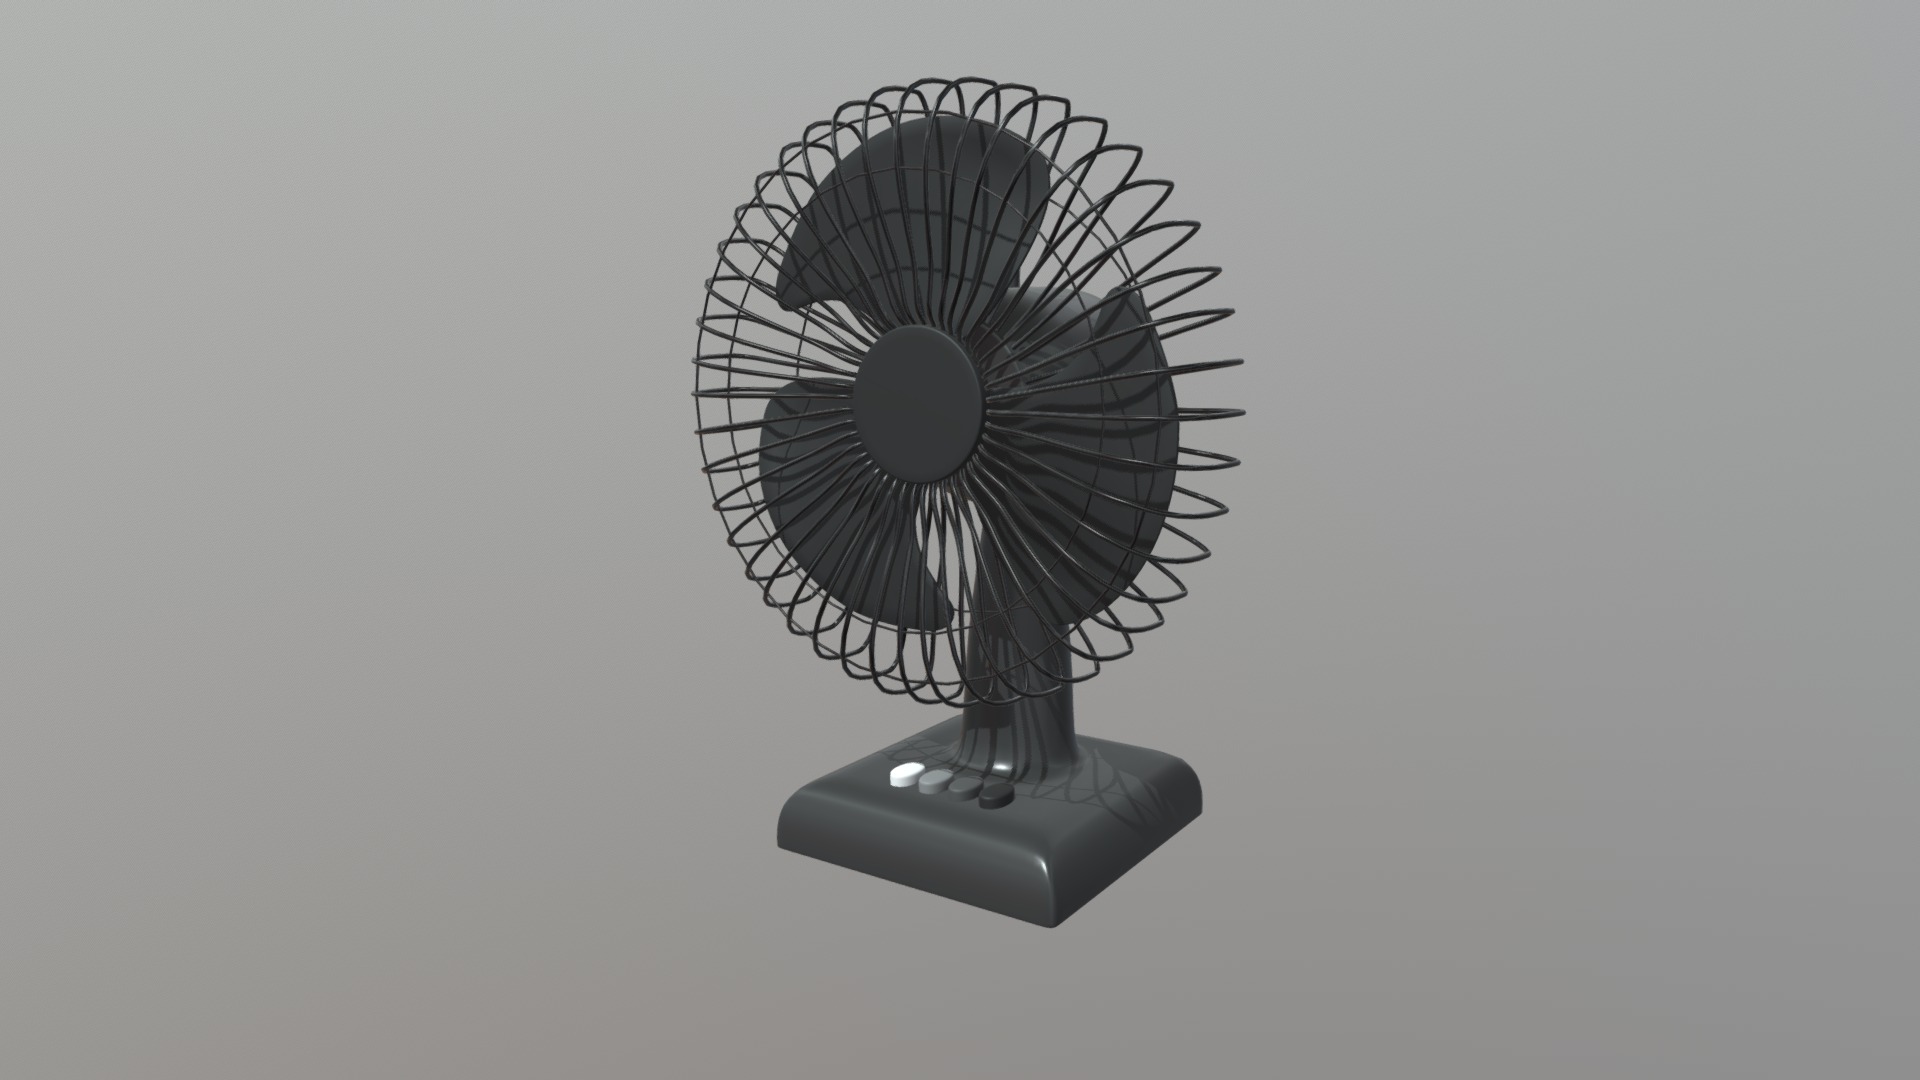 This is an example animation of my household table fan. You can find the model available for purchase here: https://skfb.ly/6AoAZ

The animation shows the black version of the fan model spinning its blades. The animation lasts for 8 seconds and is 190 frames. In the animation settings you have the option to change the speed of the animation 3d model